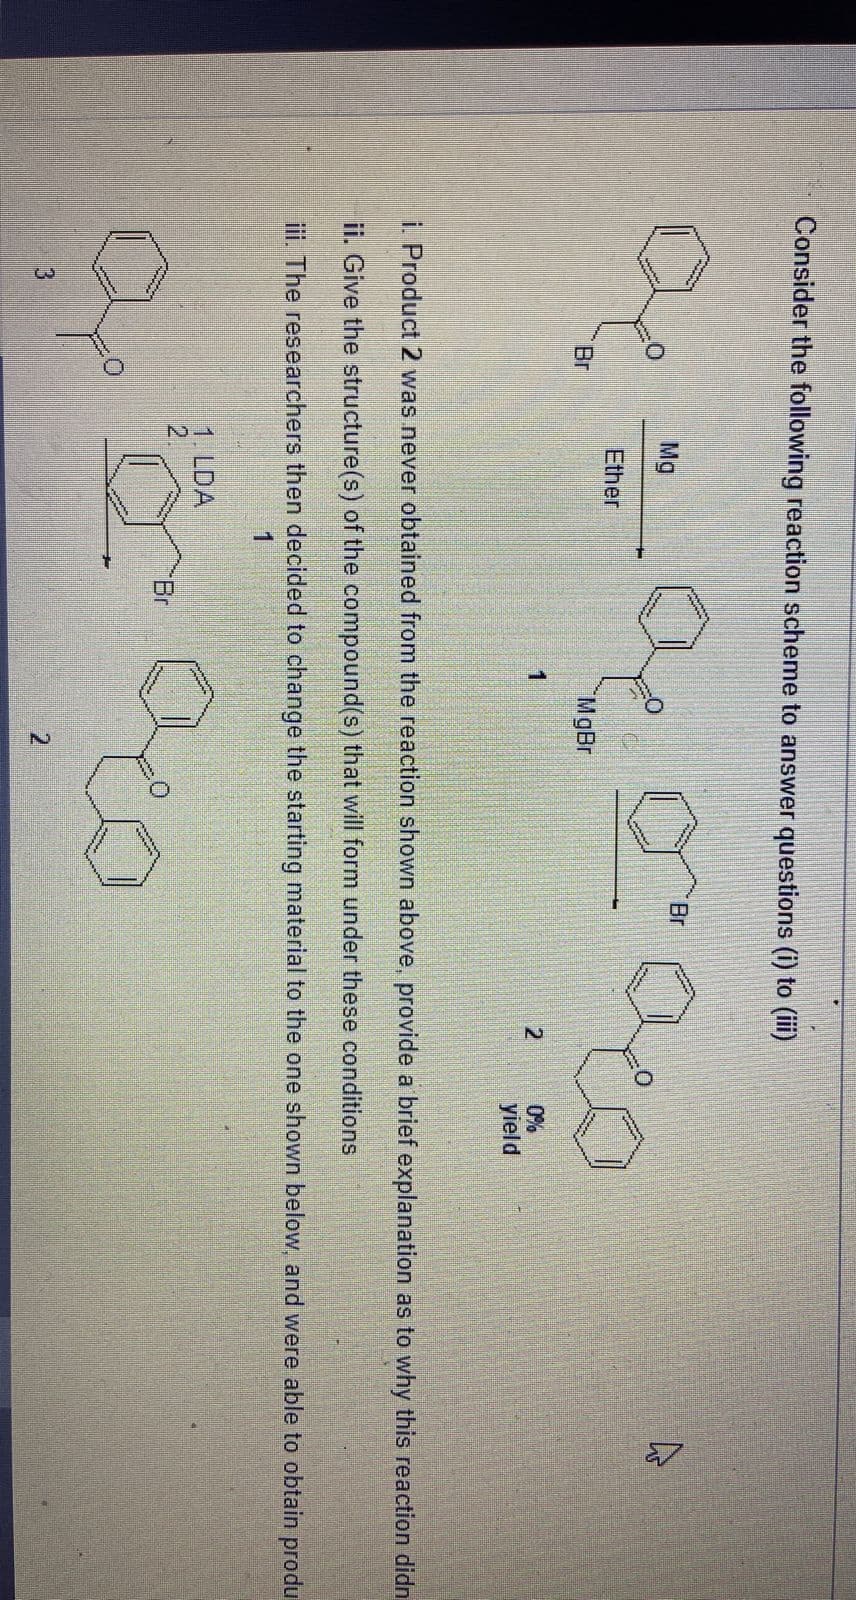 Consider the following reaction scheme to answer questions (i) to (iii)
Q
Br
Mg
Ether
Qº
3
00
MgBr
1. LDA
2
1
Br
Br
i. Product 2 was never obtained from the reaction shown above, provide a brief explanation as to why this reaction didn
ii. Give the structure(s) of the compound(s) that will form under these conditions
iii. The researchers then decided to change the starting material to the one shown below, and were able to obtain produ
1
2
2
0%
yield
A